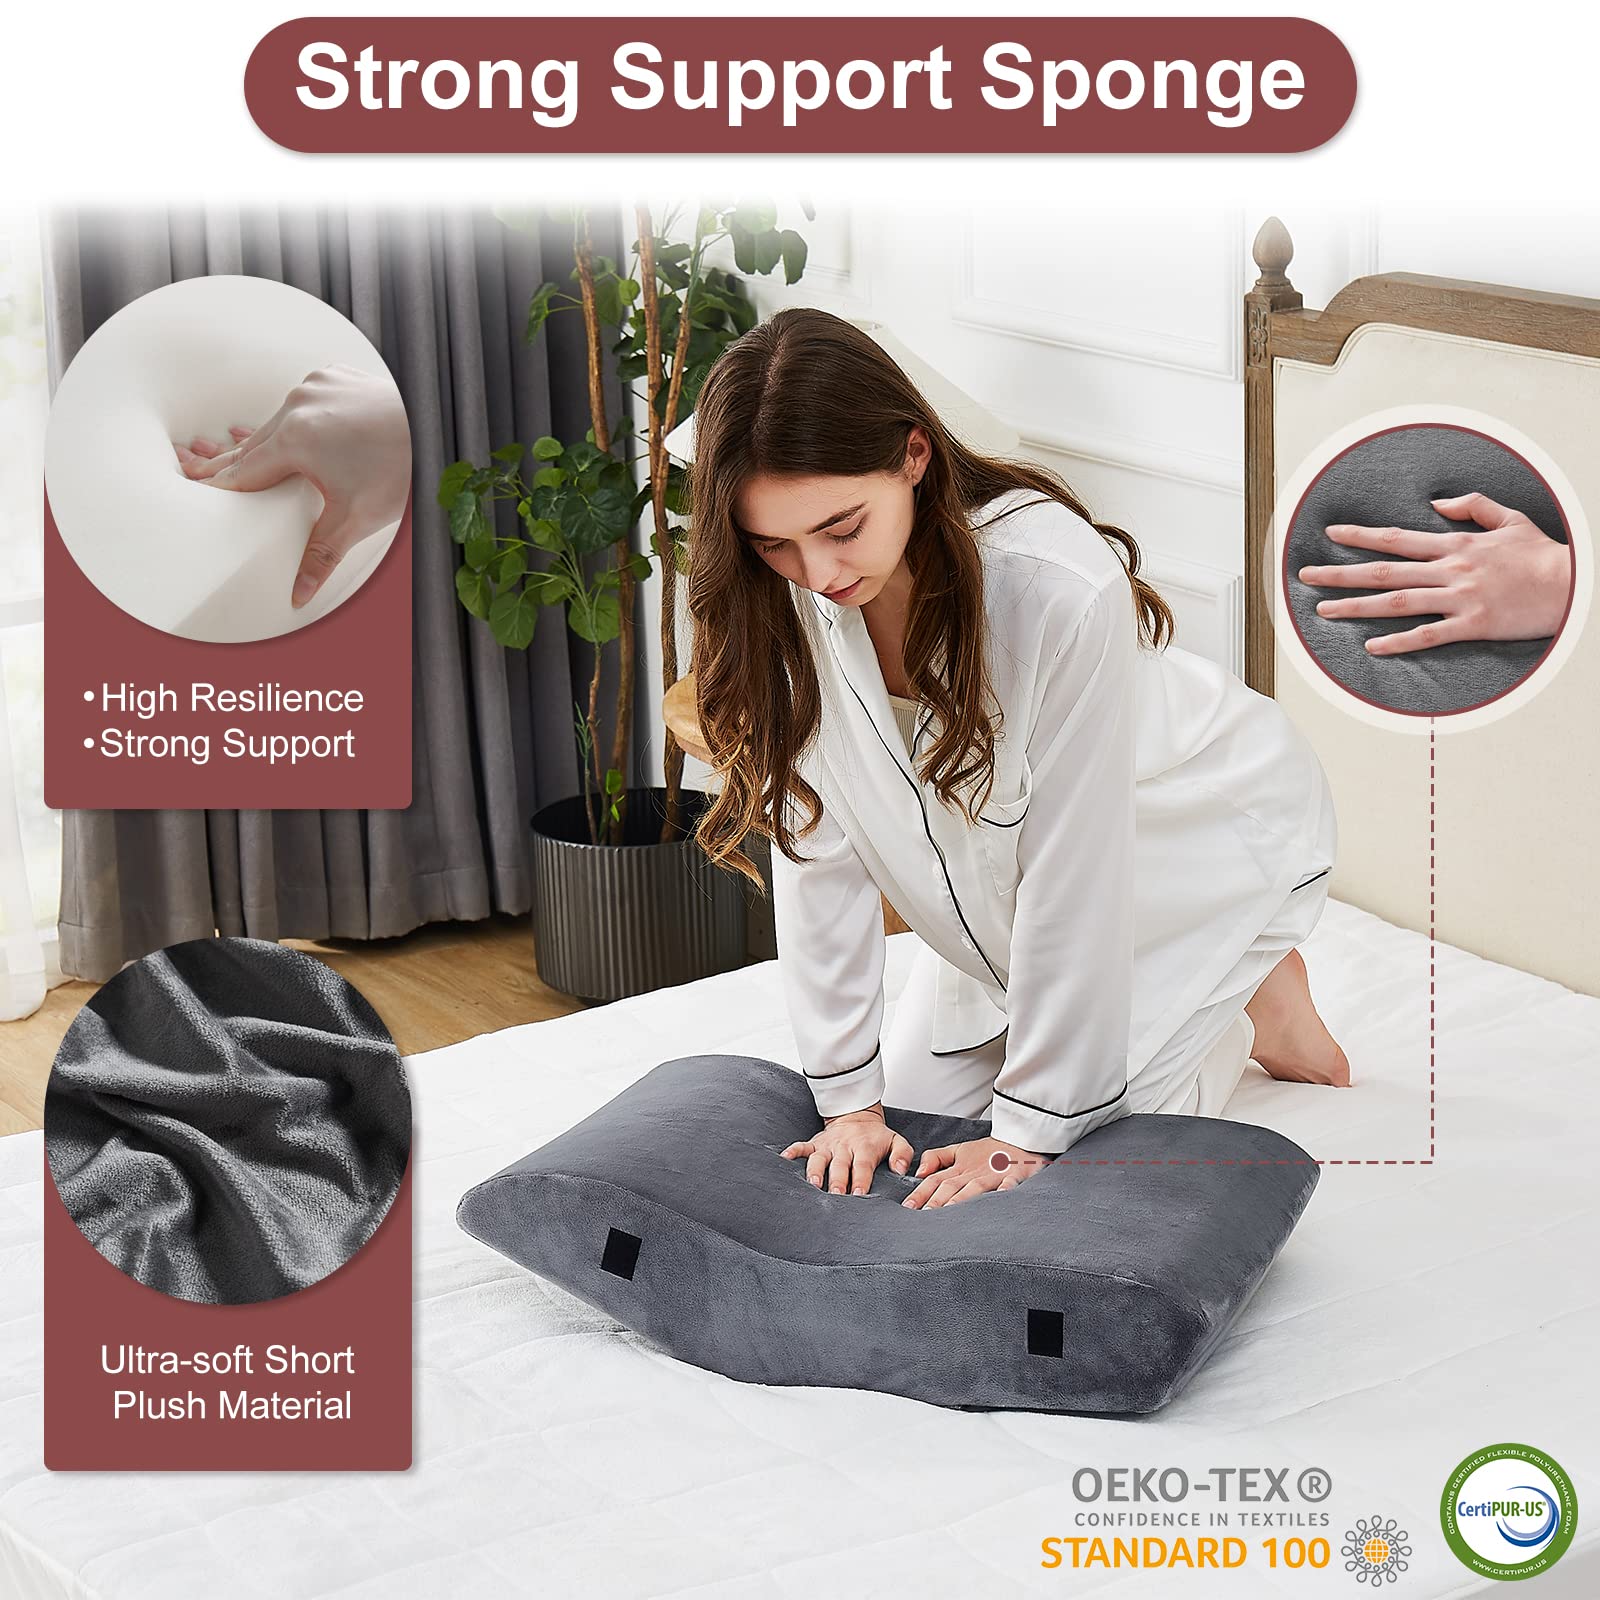 HomeMate 3 PCS Bed Wedge Pillow Set, Orthopedic for After Surgery, Foam Pillow for Back, Leg and Knee Pain Relief,Adjustable Triangle Pillow for Sleeping Acid Reflux & GERD & Snoring